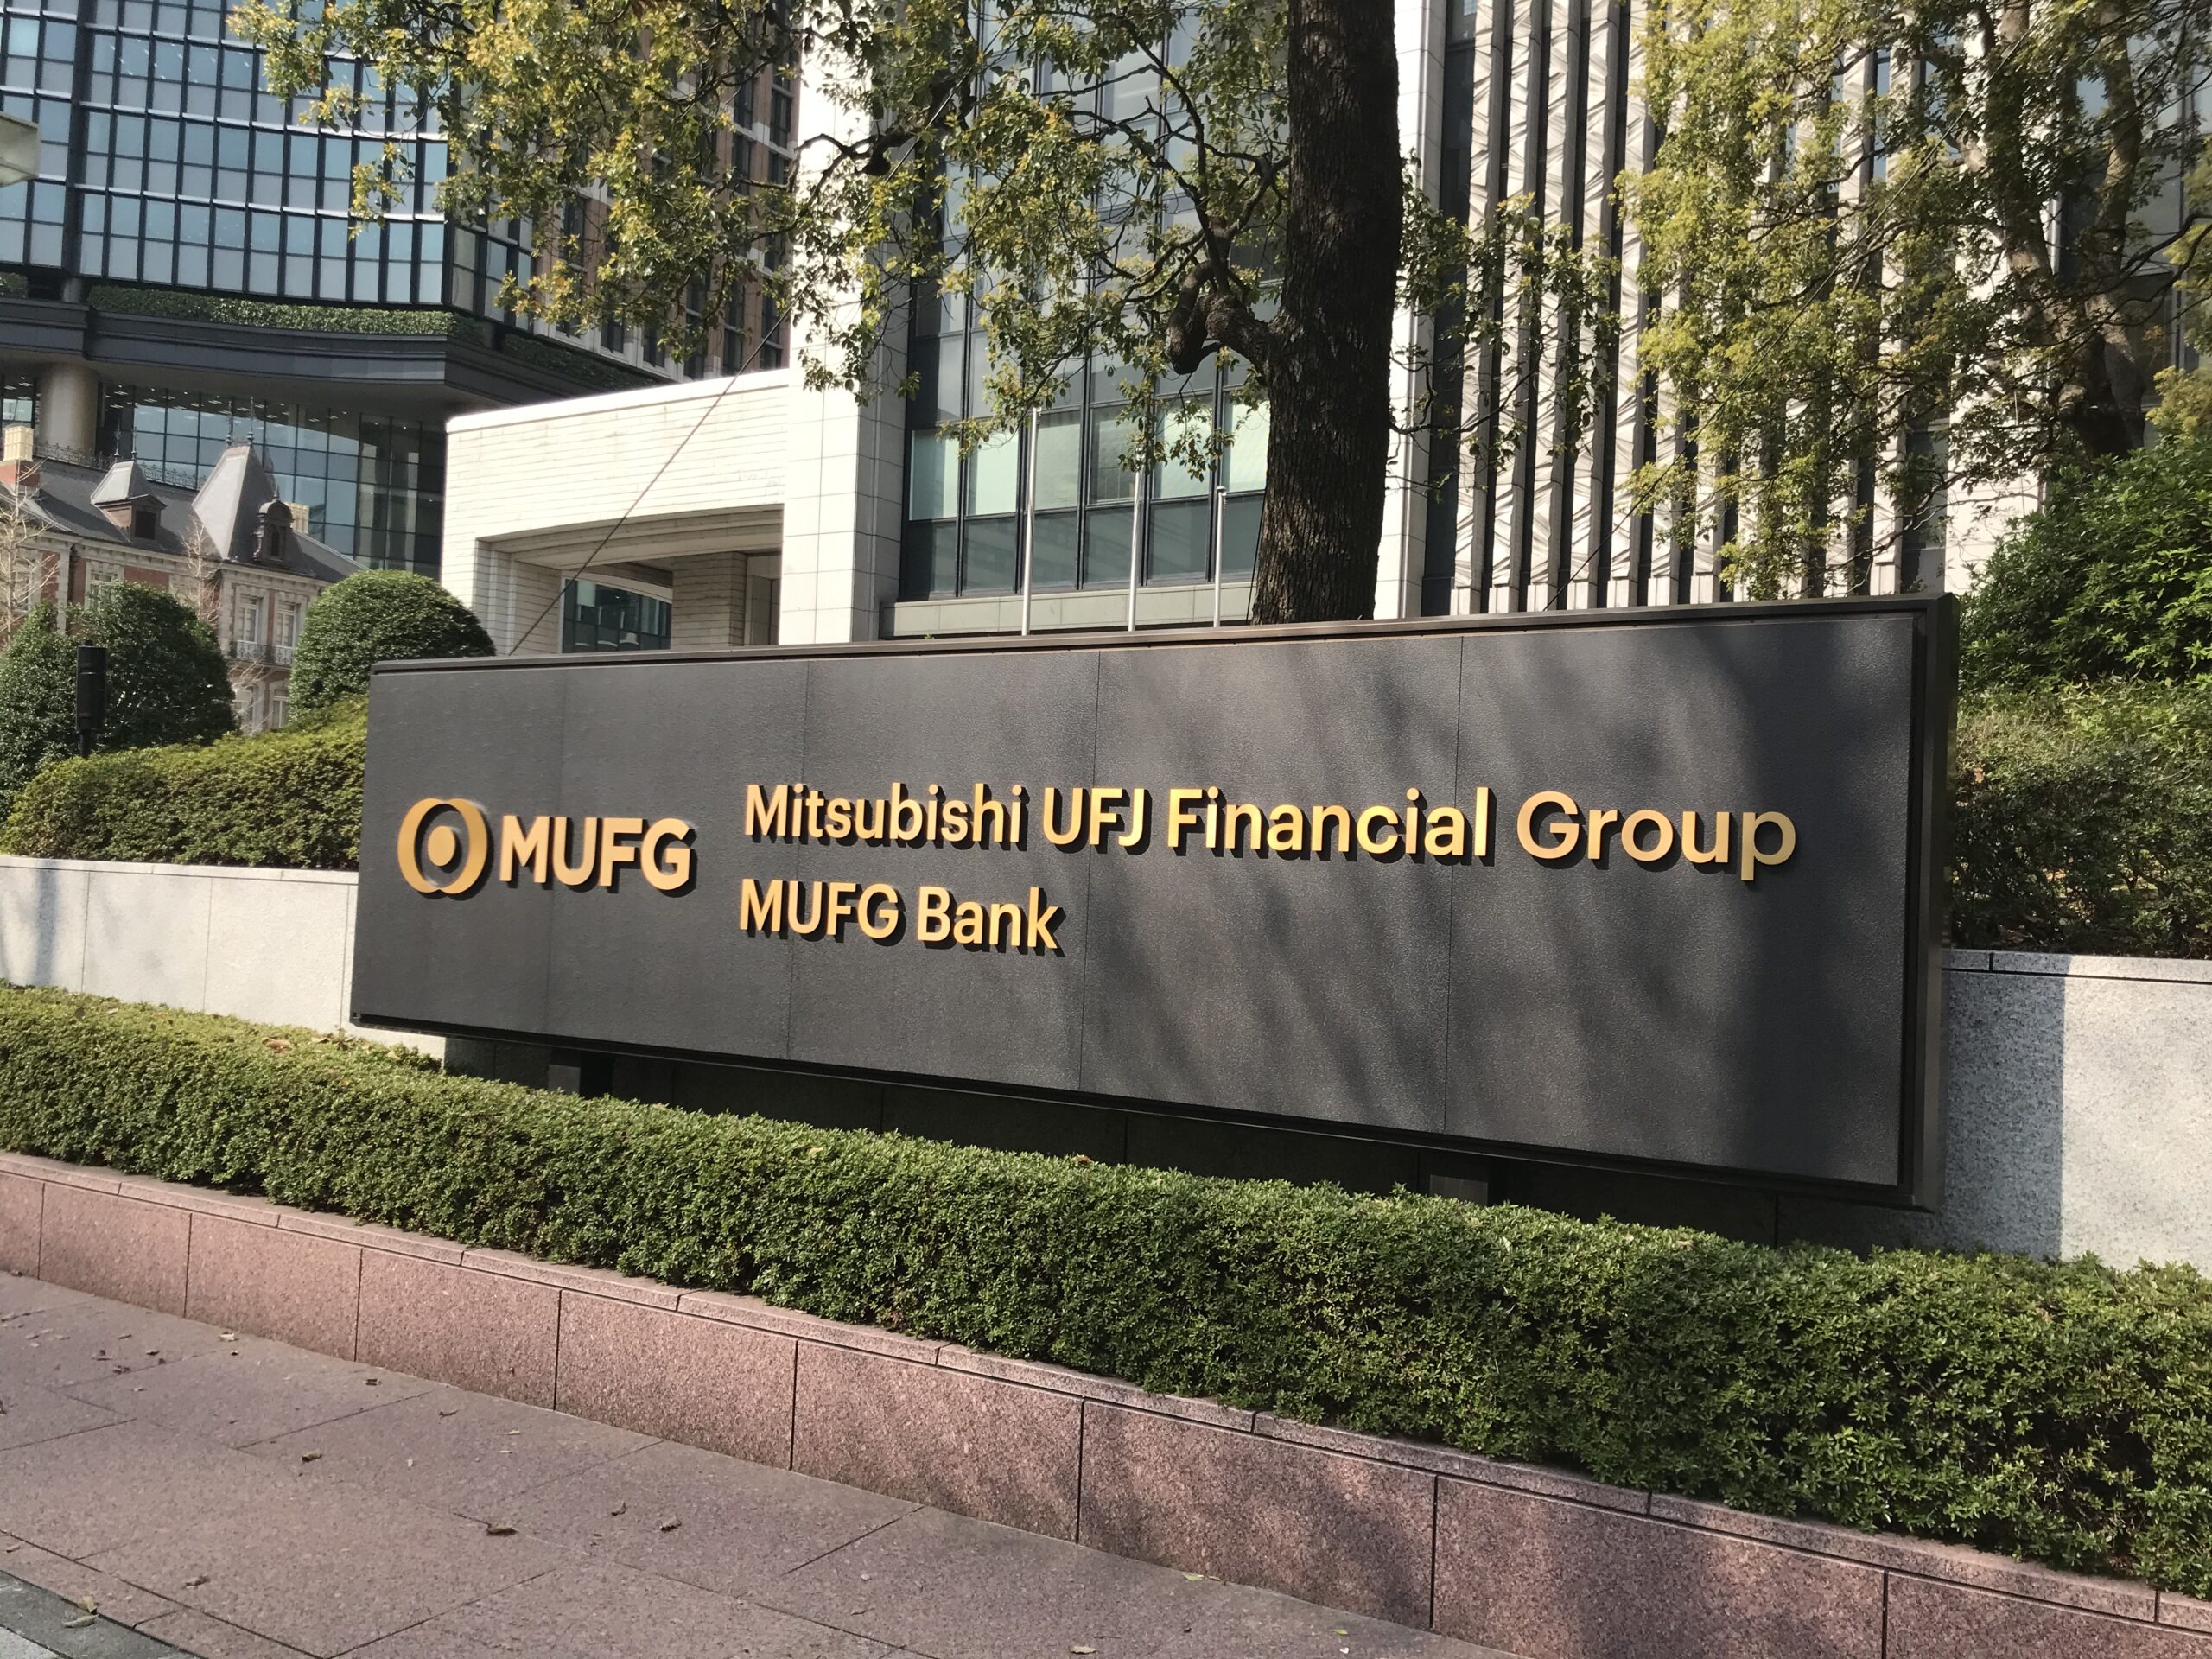 【News】 With new shareholder resolution, Kiko Network calls for MUFG to strengthen climate measures